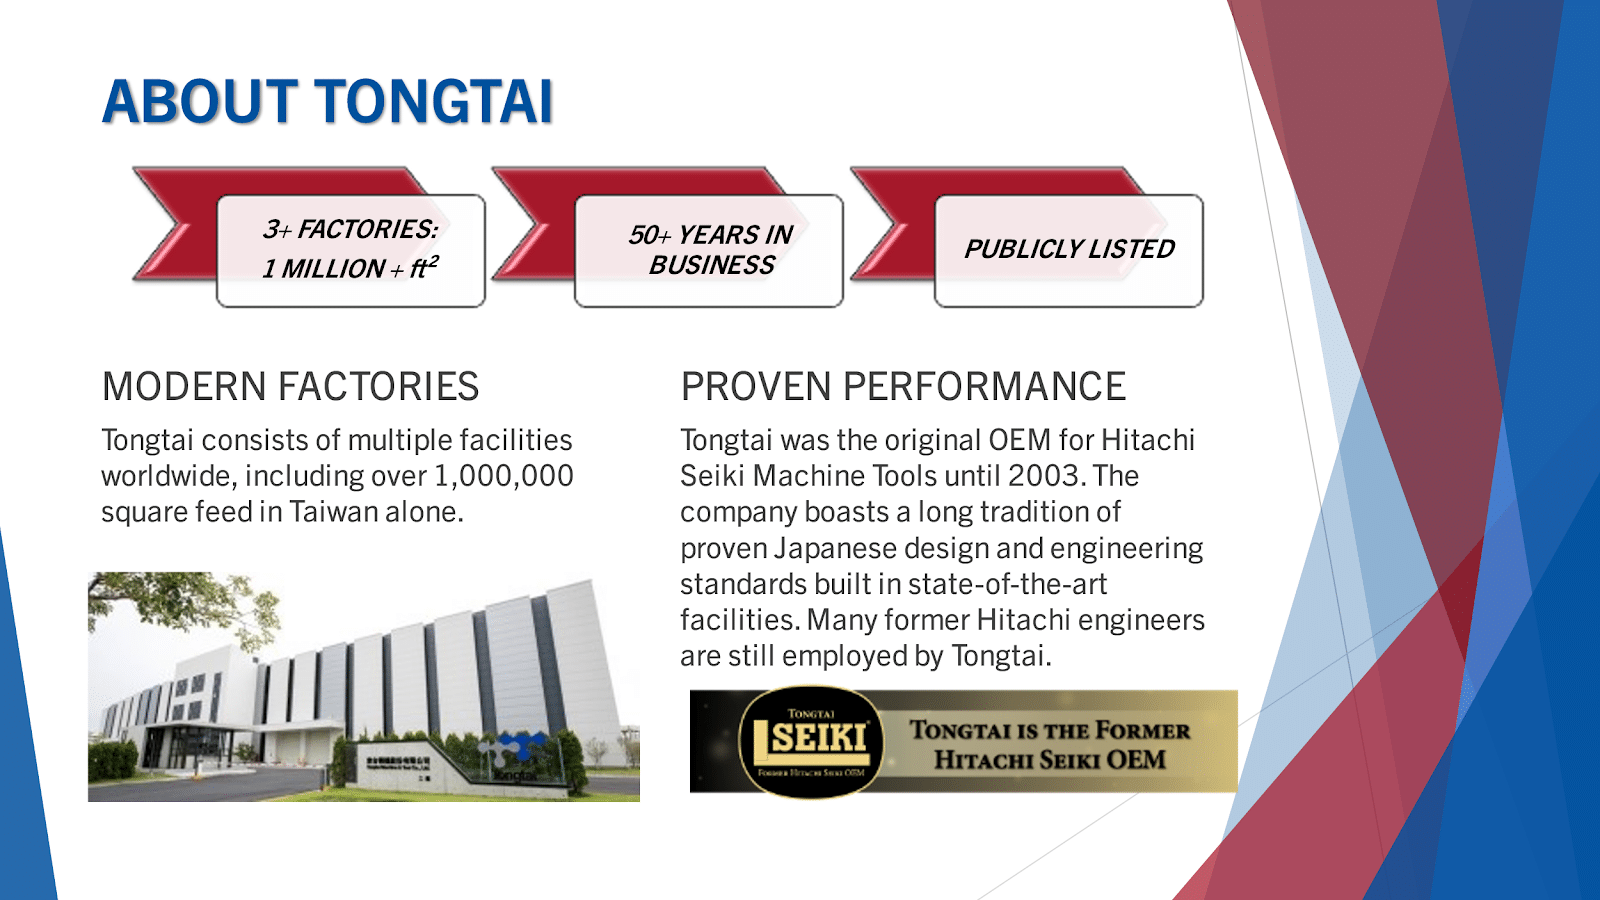 About Tongtai